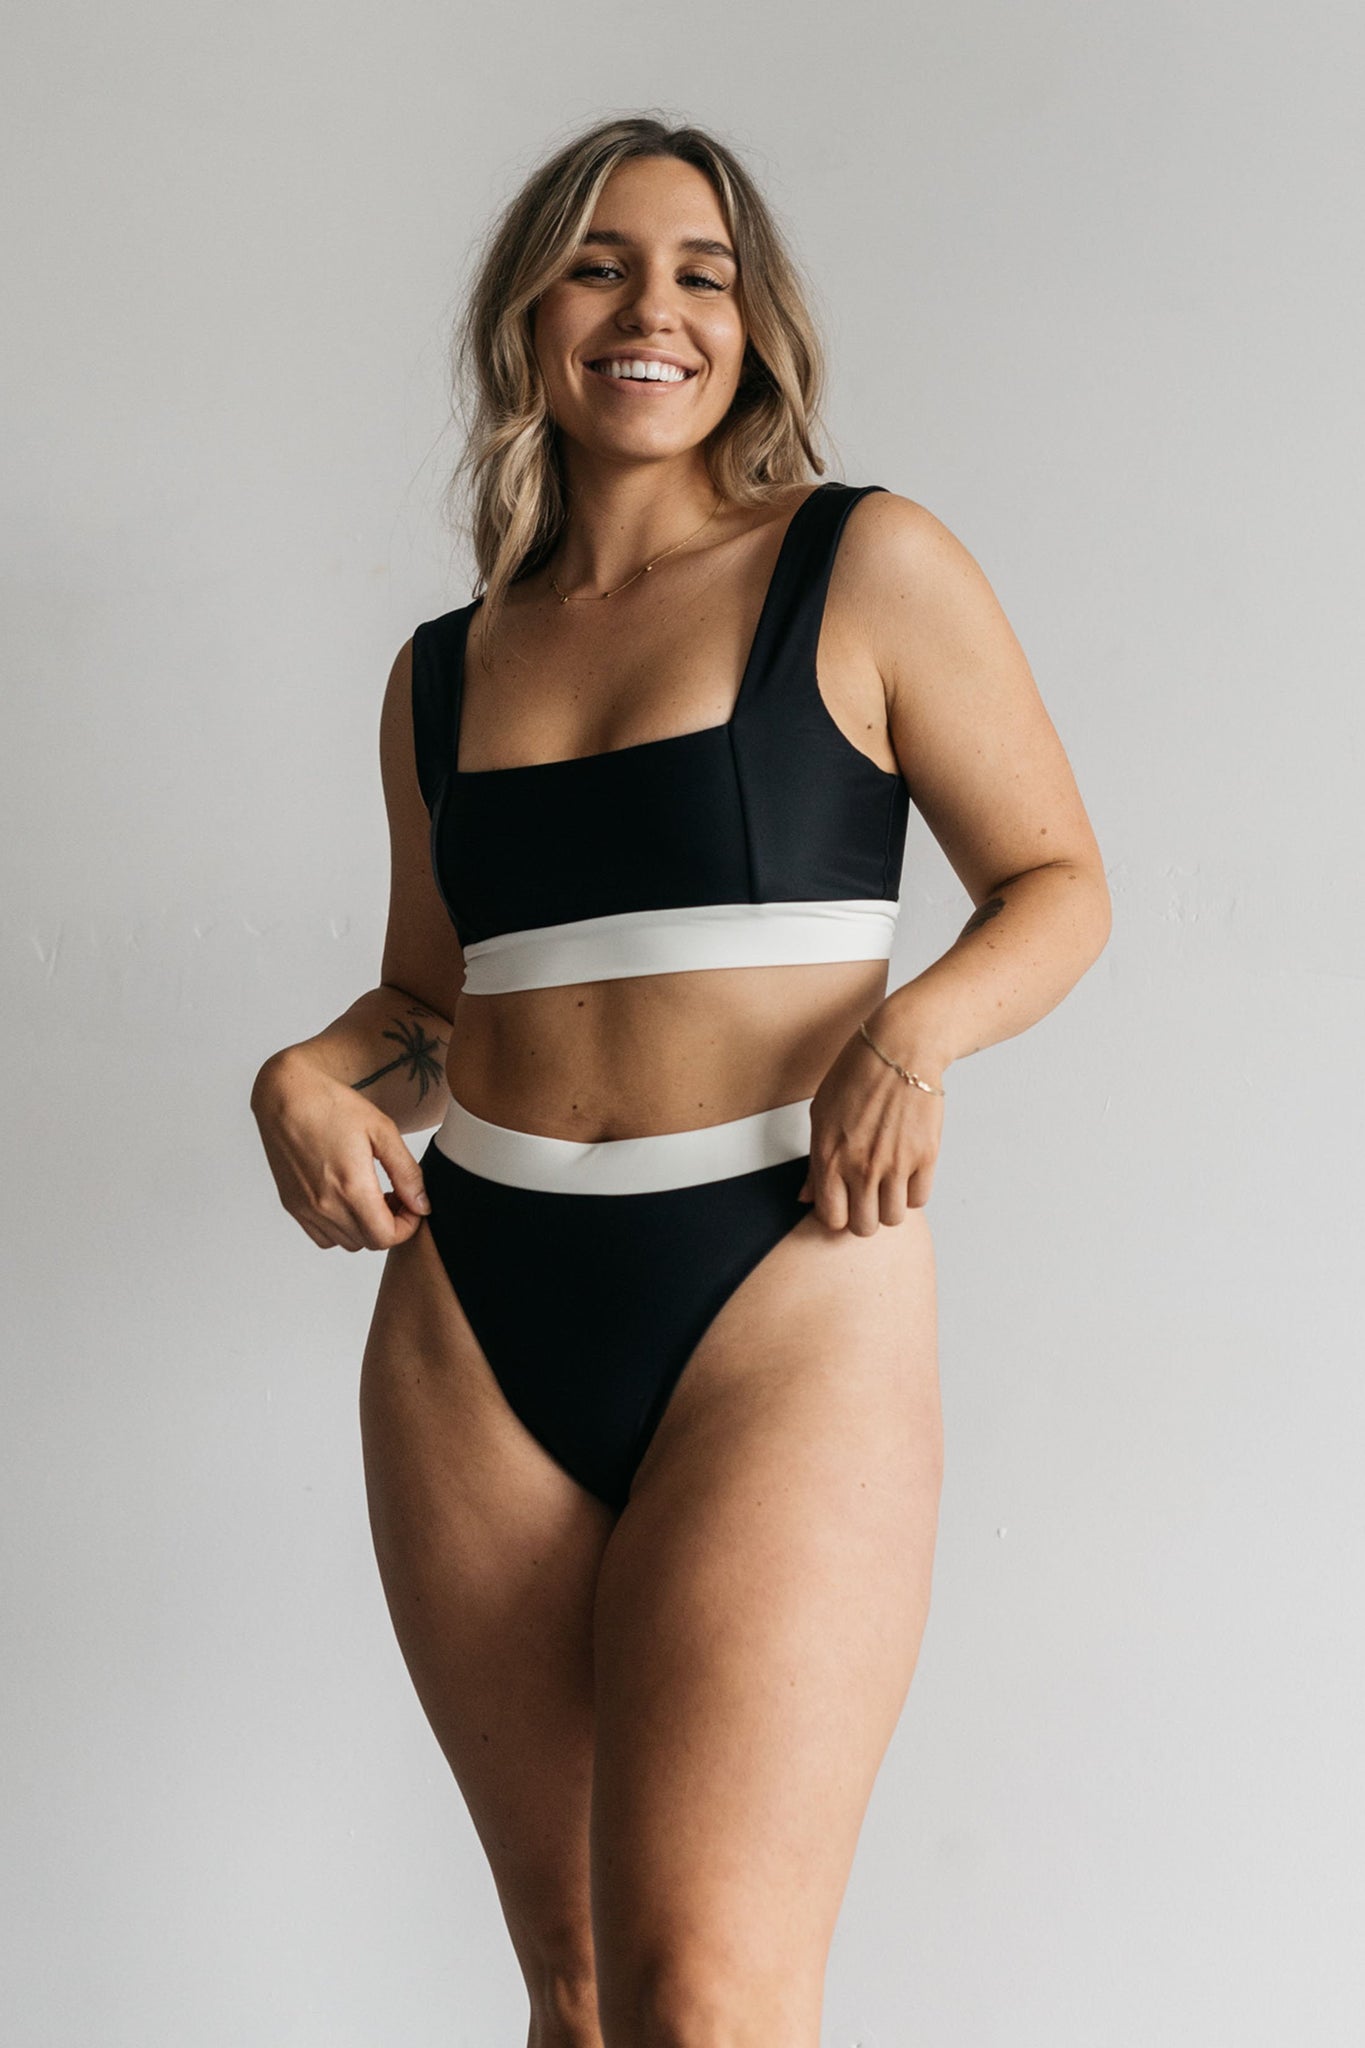 A woman standing in front of a white wall smiling wearing high waisted black bikini bottoms with a white waistband and a matching black bikini top with a square neckline.